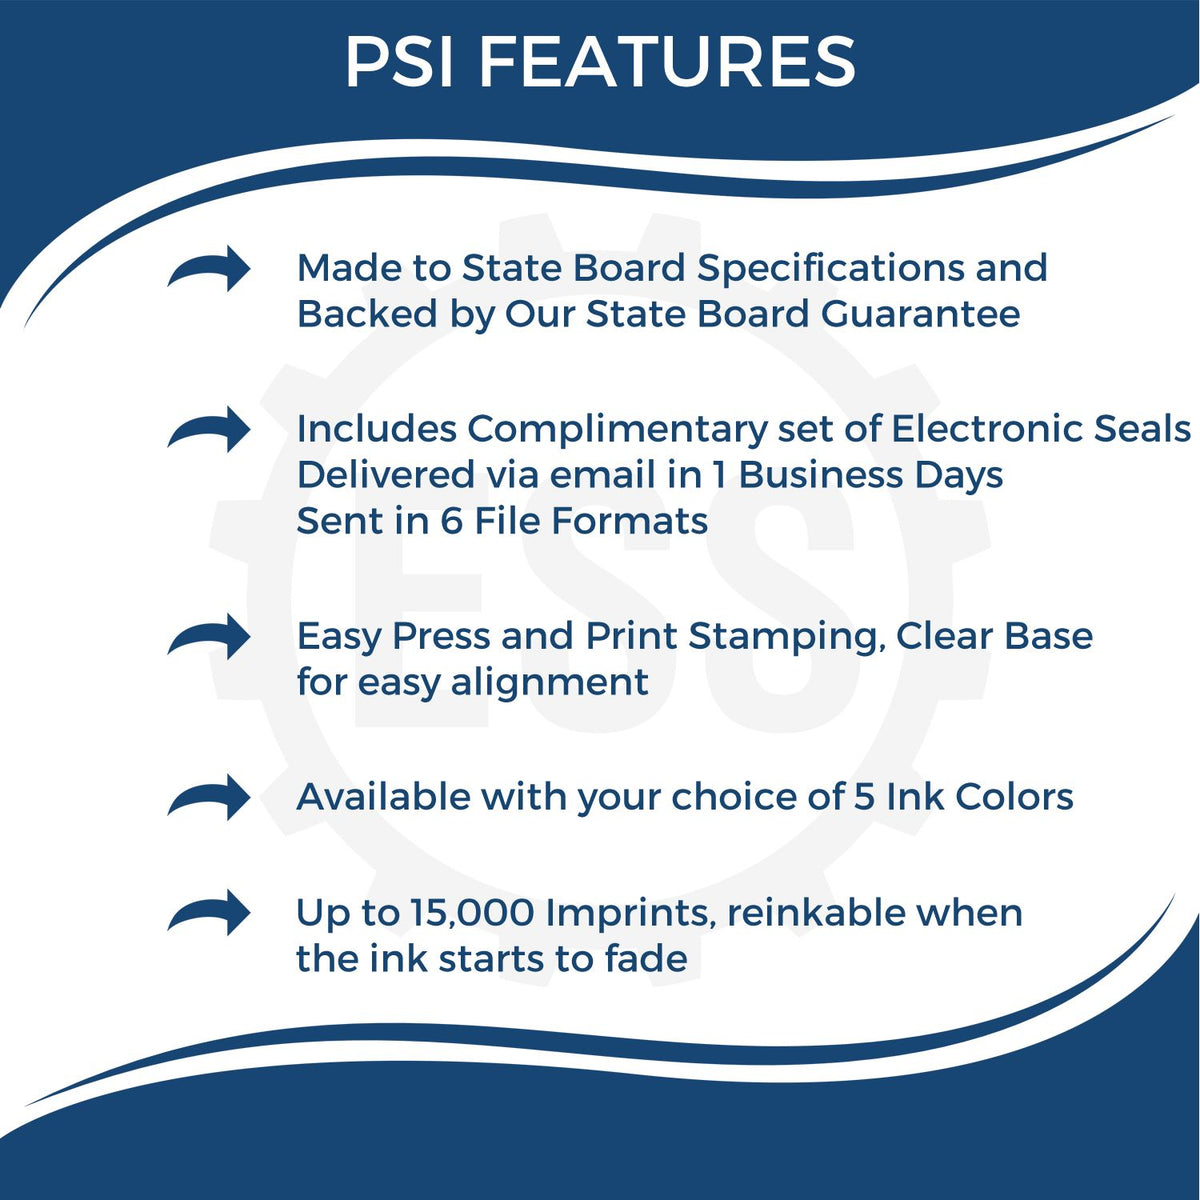 A picture of an infographic highlighting the selling points for the PSI Arkansas Notary Stamp